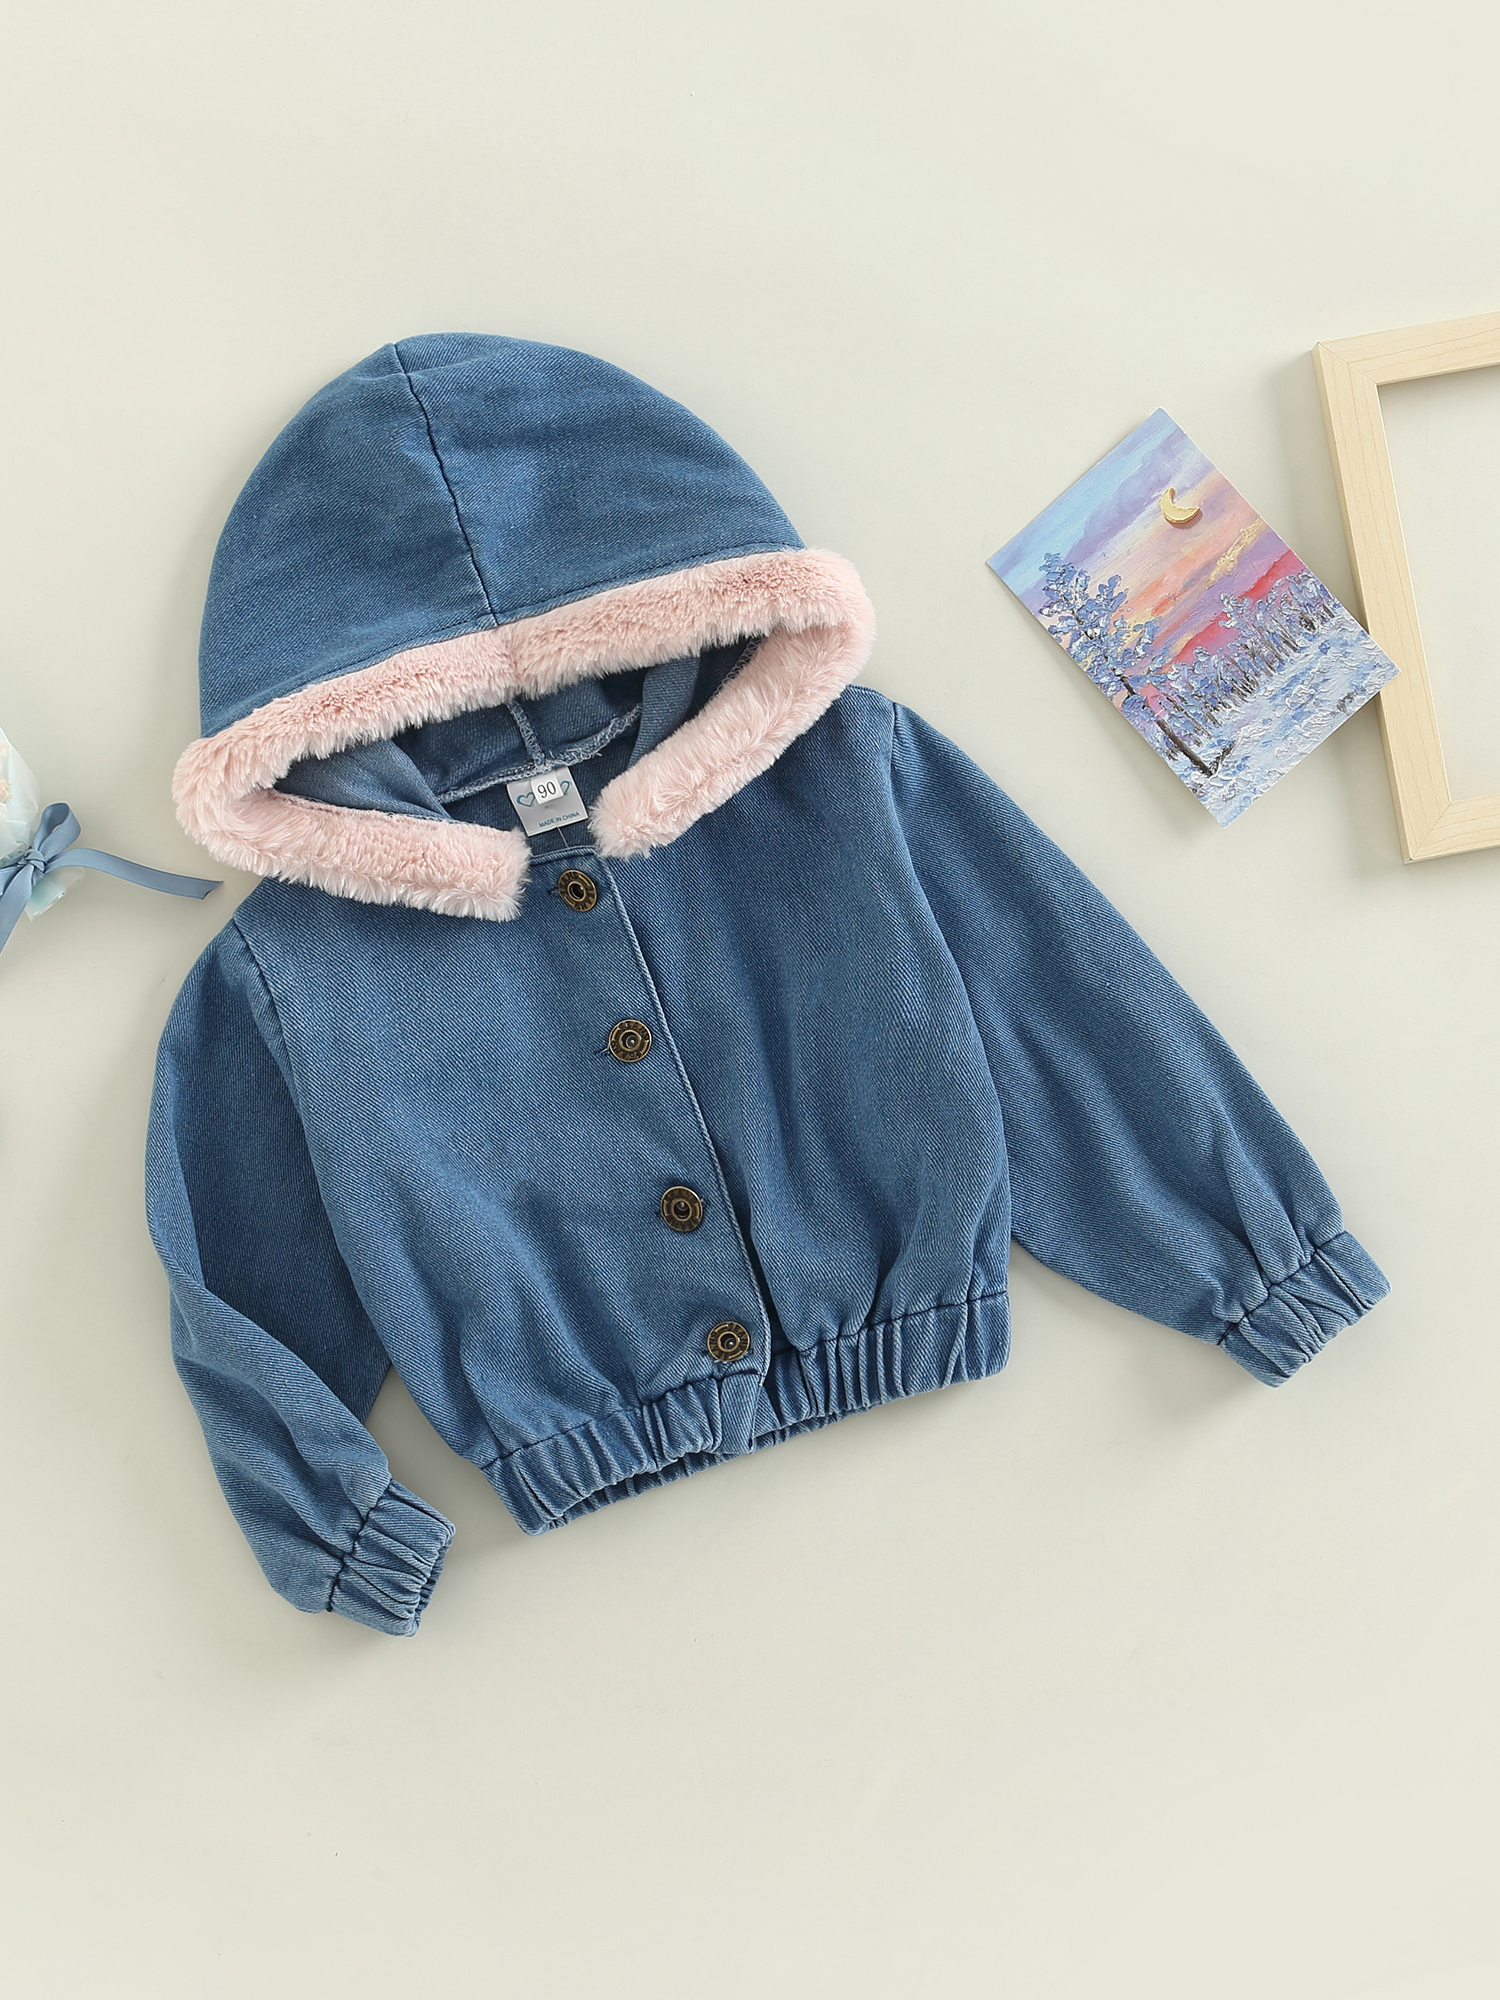 Jxzom Toddler Girls Hooded Denim Coat Long Sleeves Button Closure Thick Autumn Winter Jean Jacket - image 2 of 7